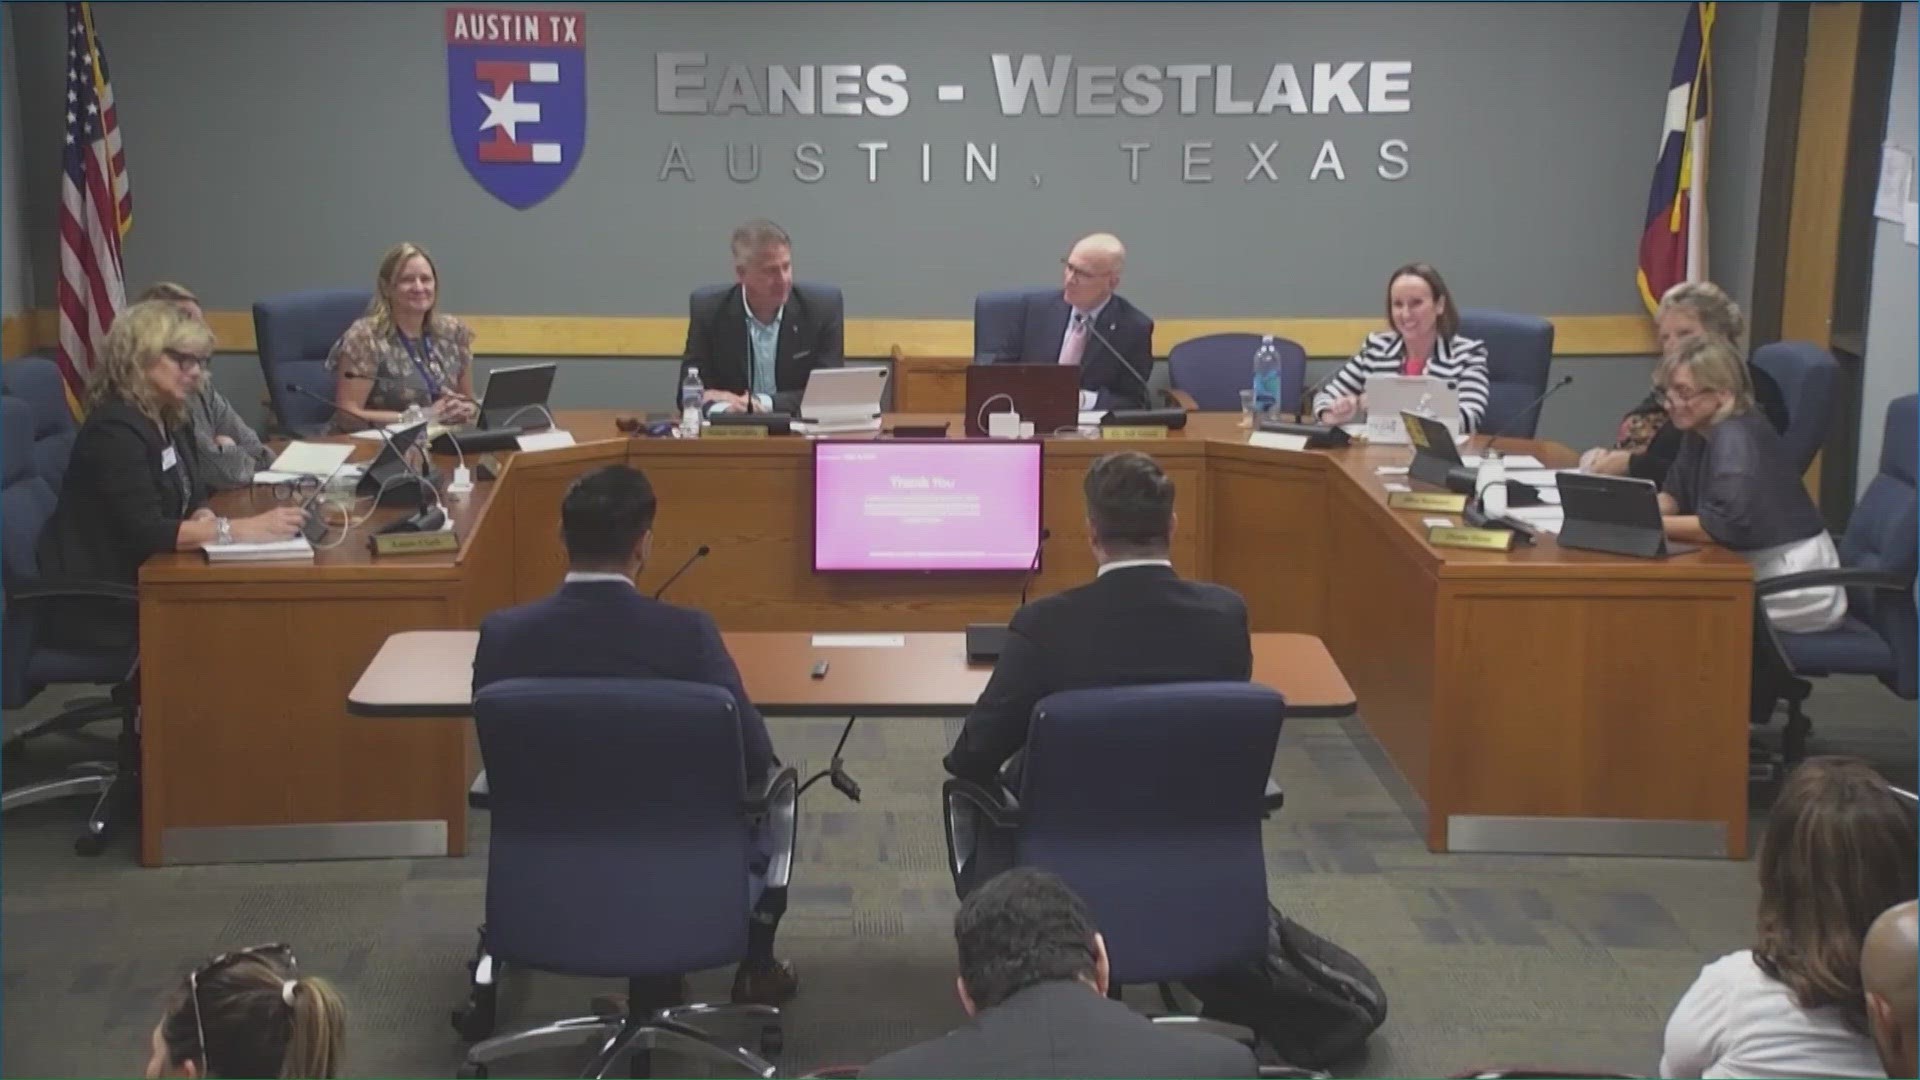 Eanes ISD voted unanimously to purchase nine Tesla vehicles for its new police force.